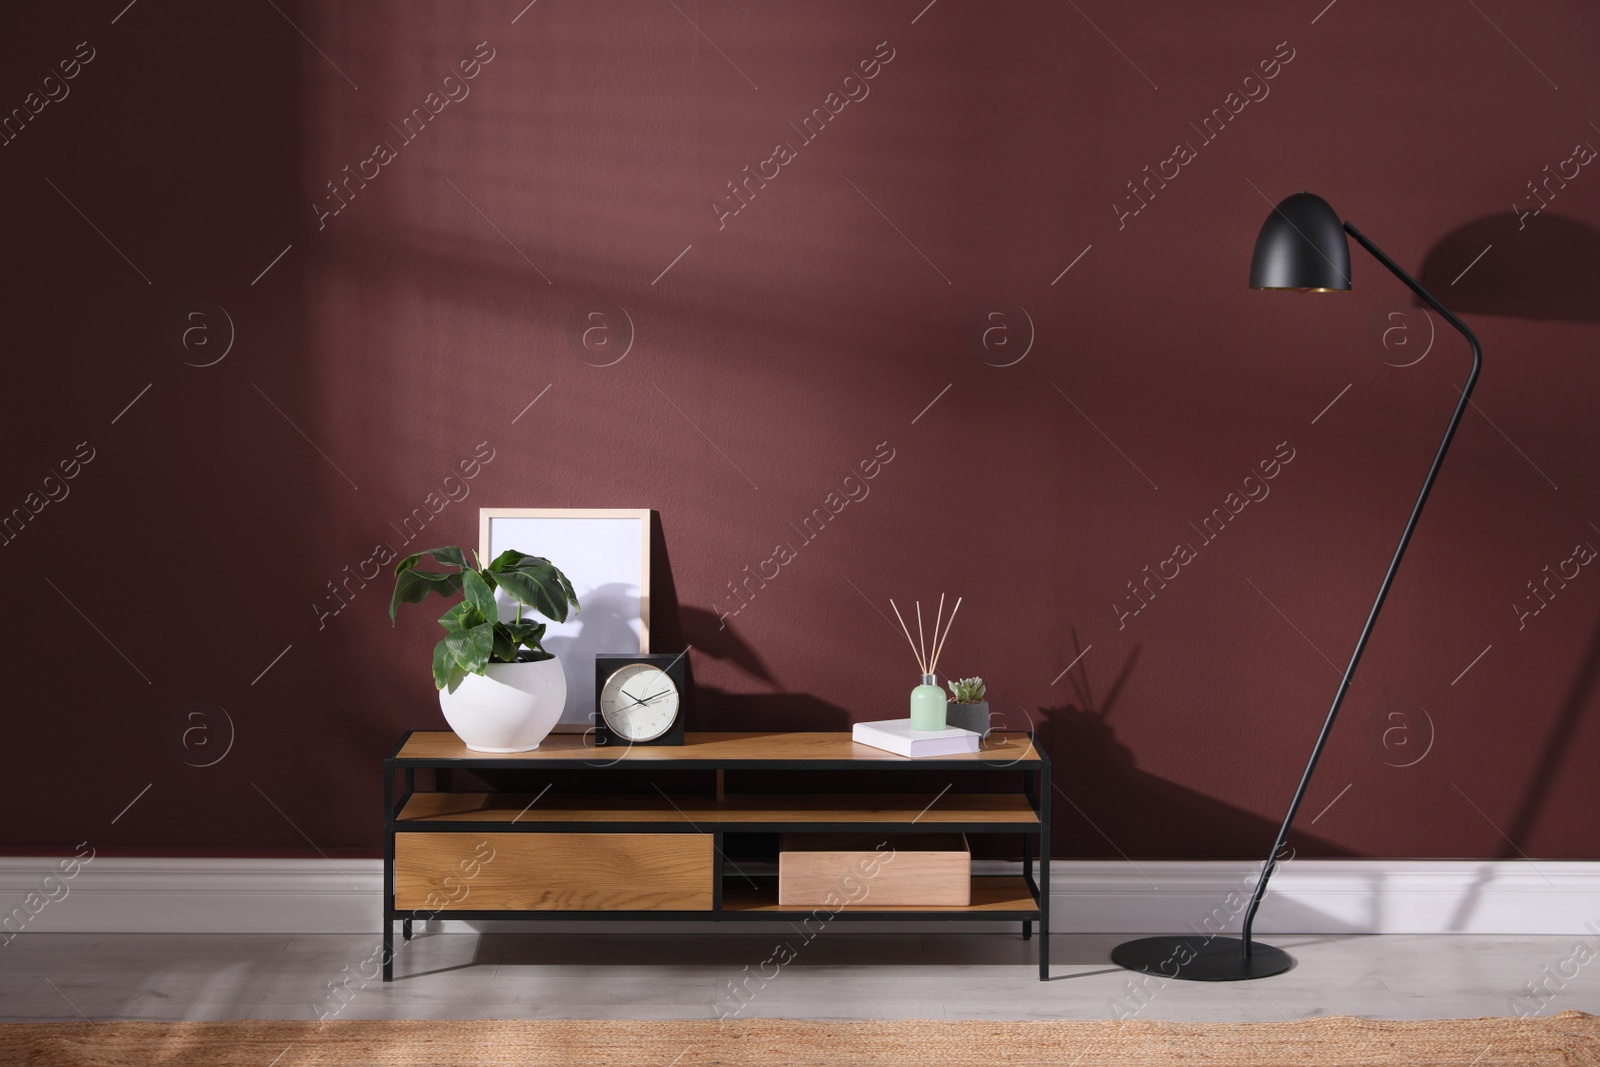 Photo of Elegant room interior with wooden cabinet and floor lamp near brown wall